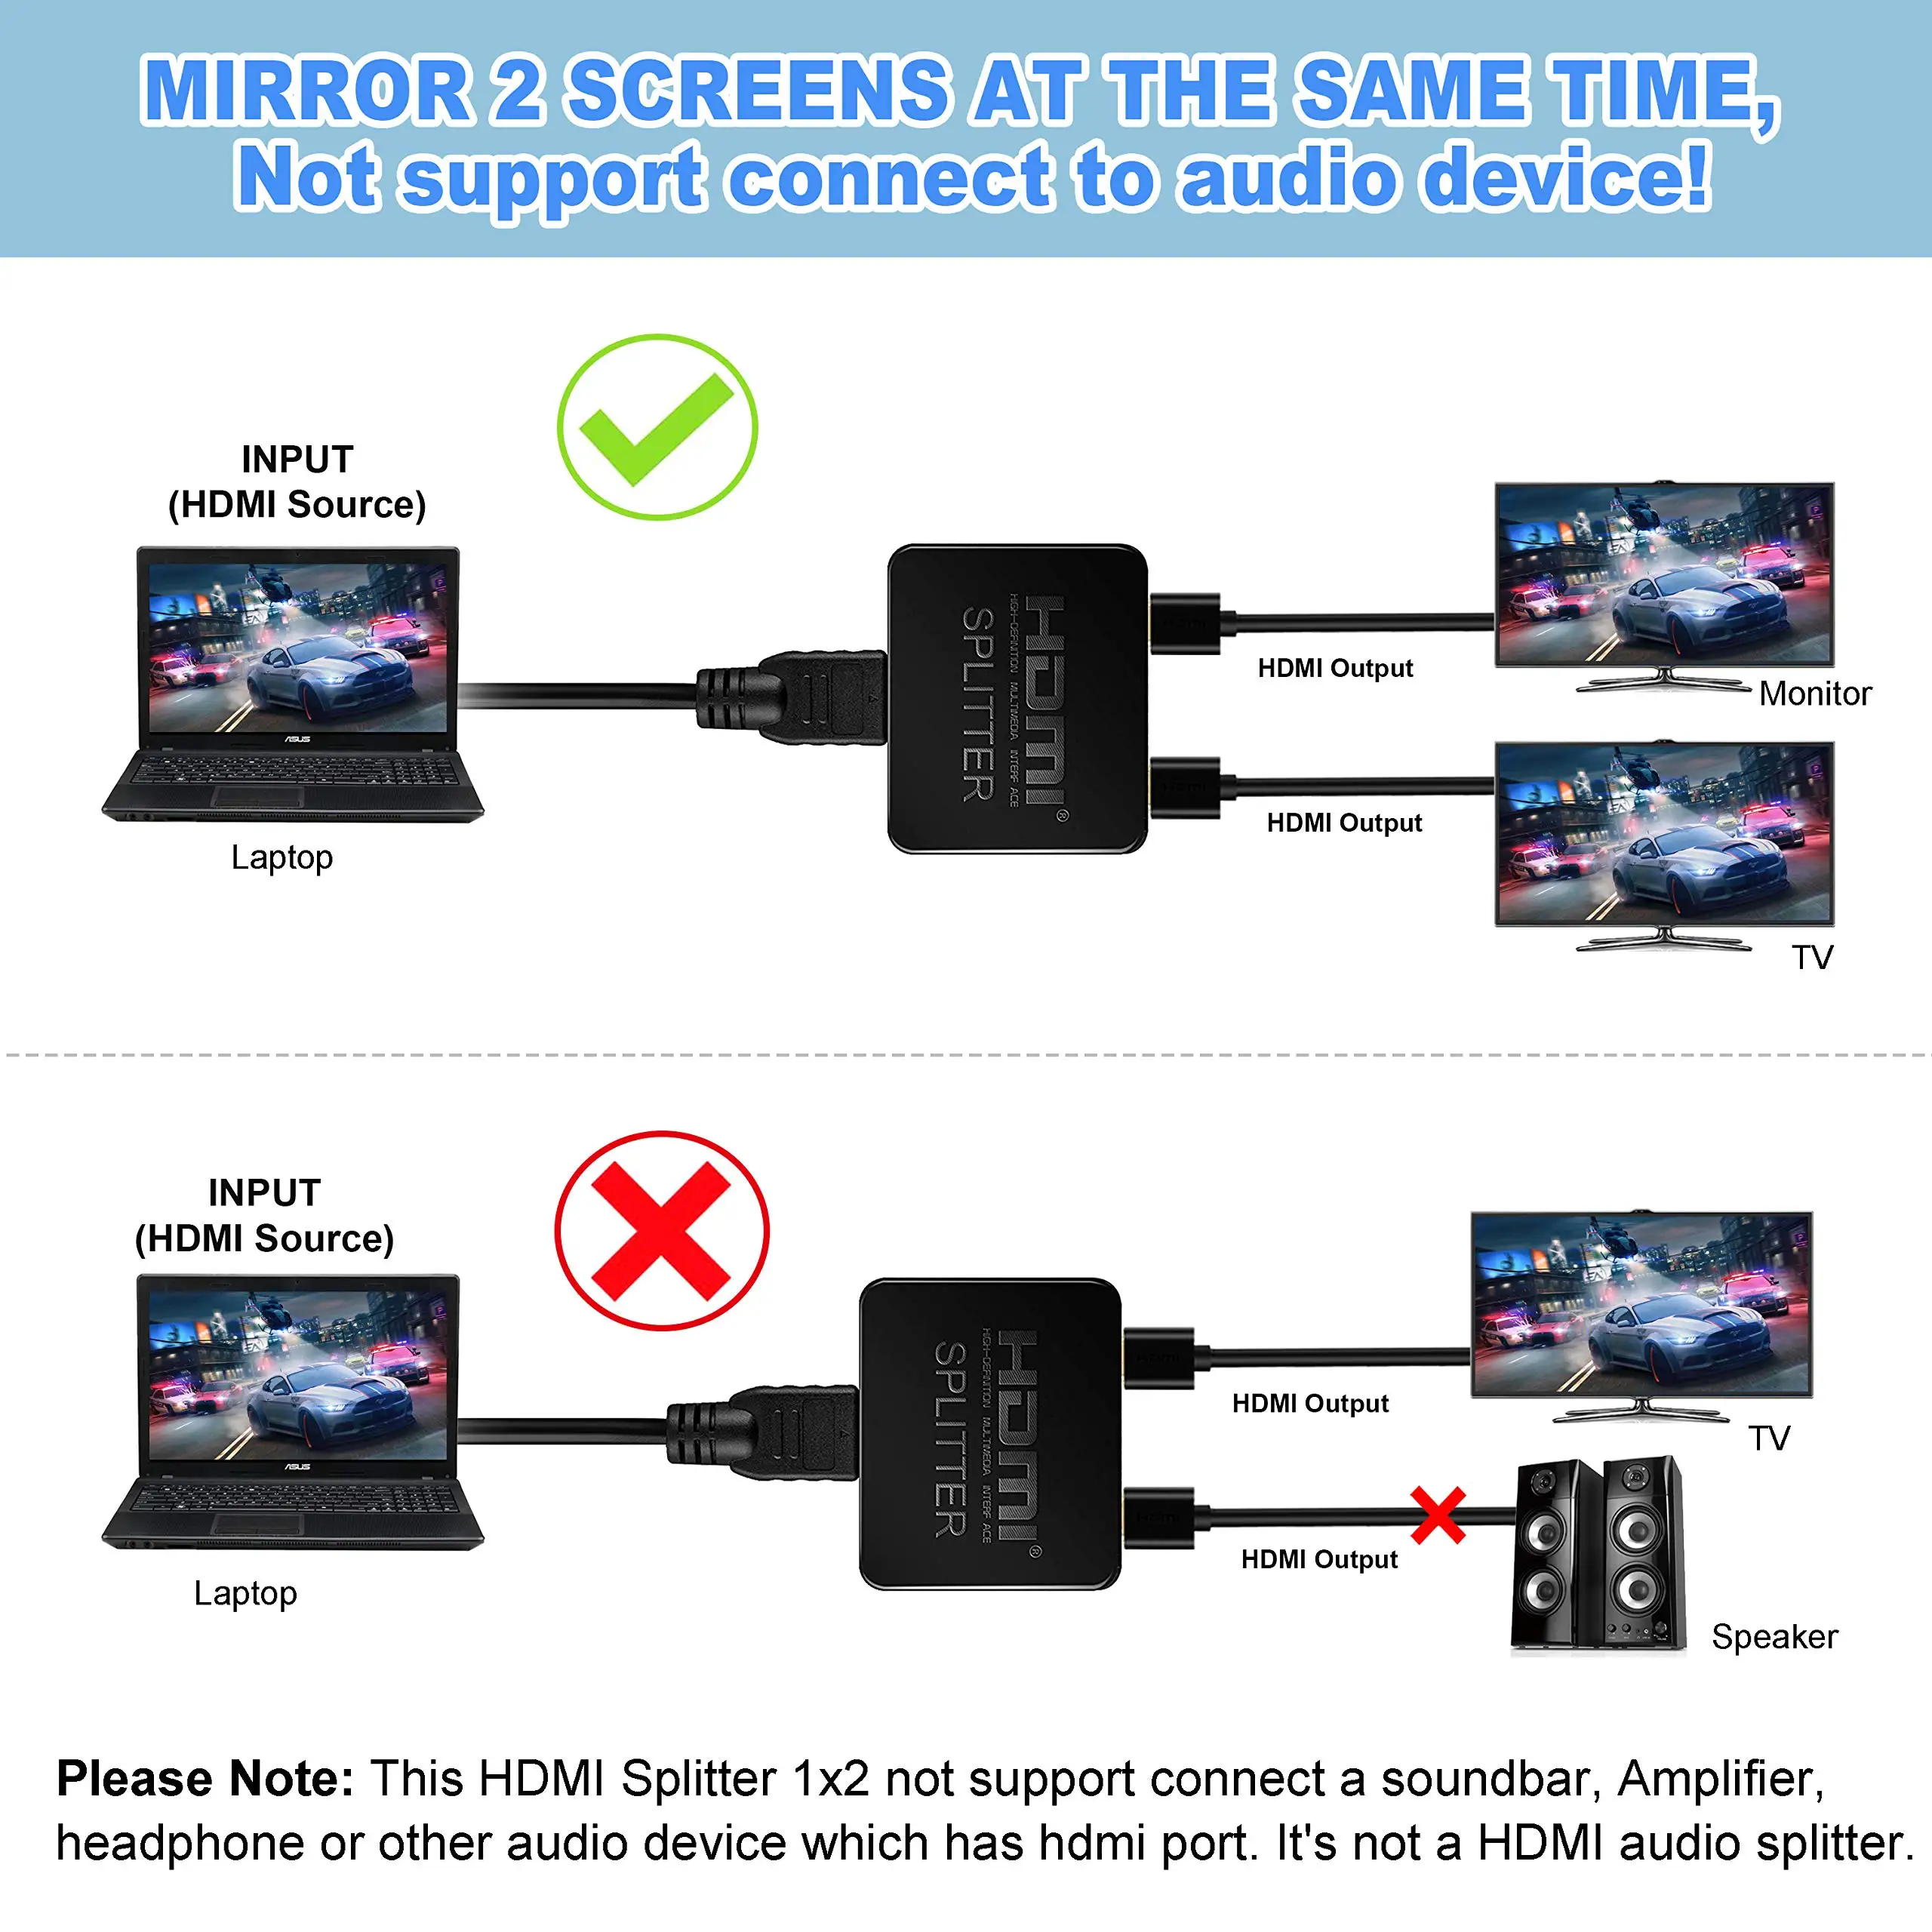 4K HDMI Splitter 1 in 2 Out for Dual Monitors Duplicate/Mirror Full HD  1080P 1 to 2 Amplifier for PS4/3 TV Box Switcher Adapter - AliExpress